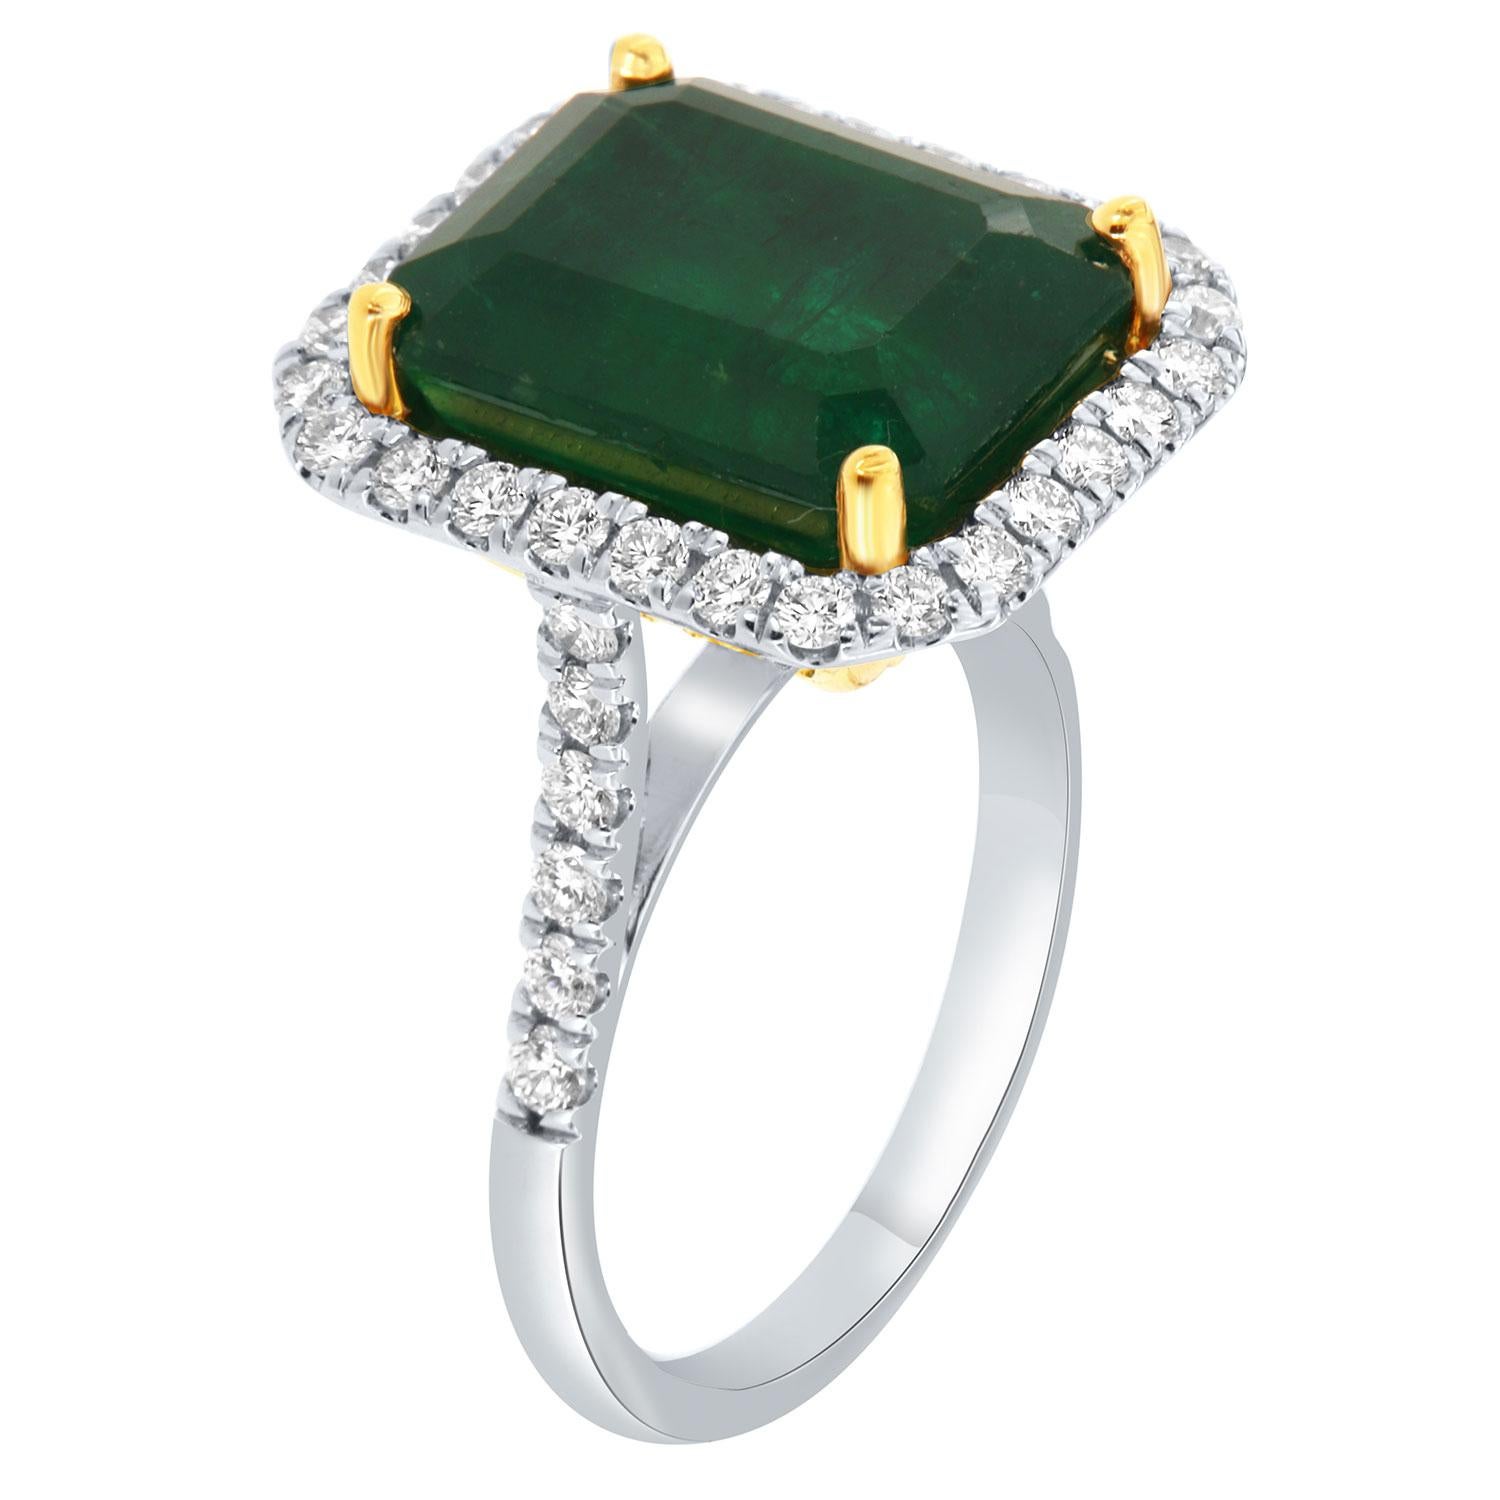 This 14K White and Yellow gold ring feature a GIA Certified 9.57-Carat Emerald cut Natural Green Emerald from Zambia. A halo of brilliant round diamonds encircles the emerald. Three rows of diamonds Micro-Prong set underneath the halo on the yellow